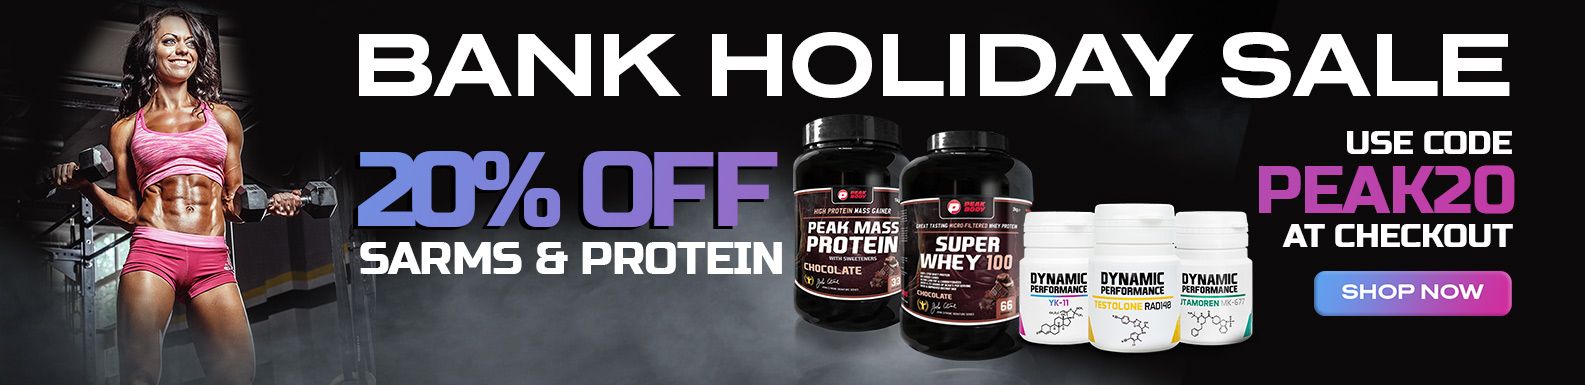 20% off SARMs and Protein - Enter PEAK20 at checkout